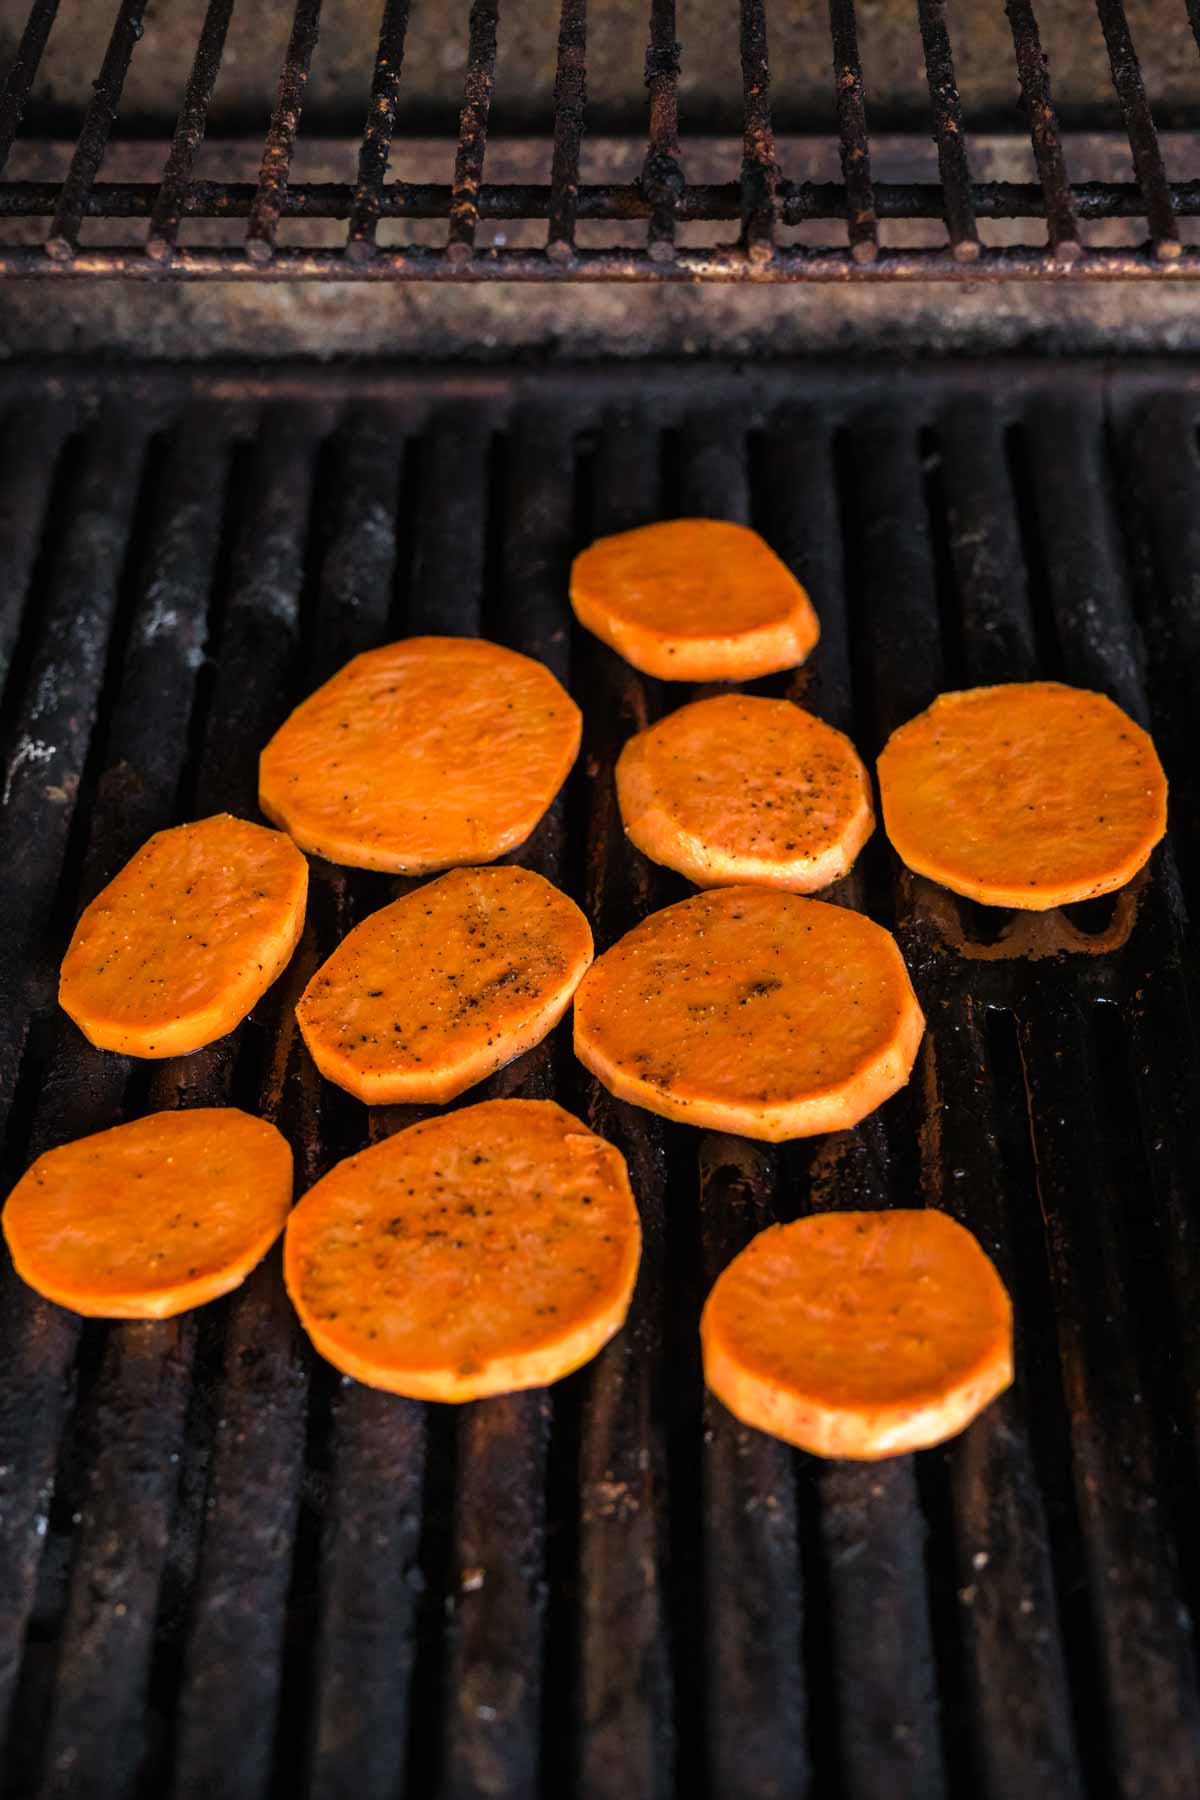 Placed sweet potatoes on a grill grates